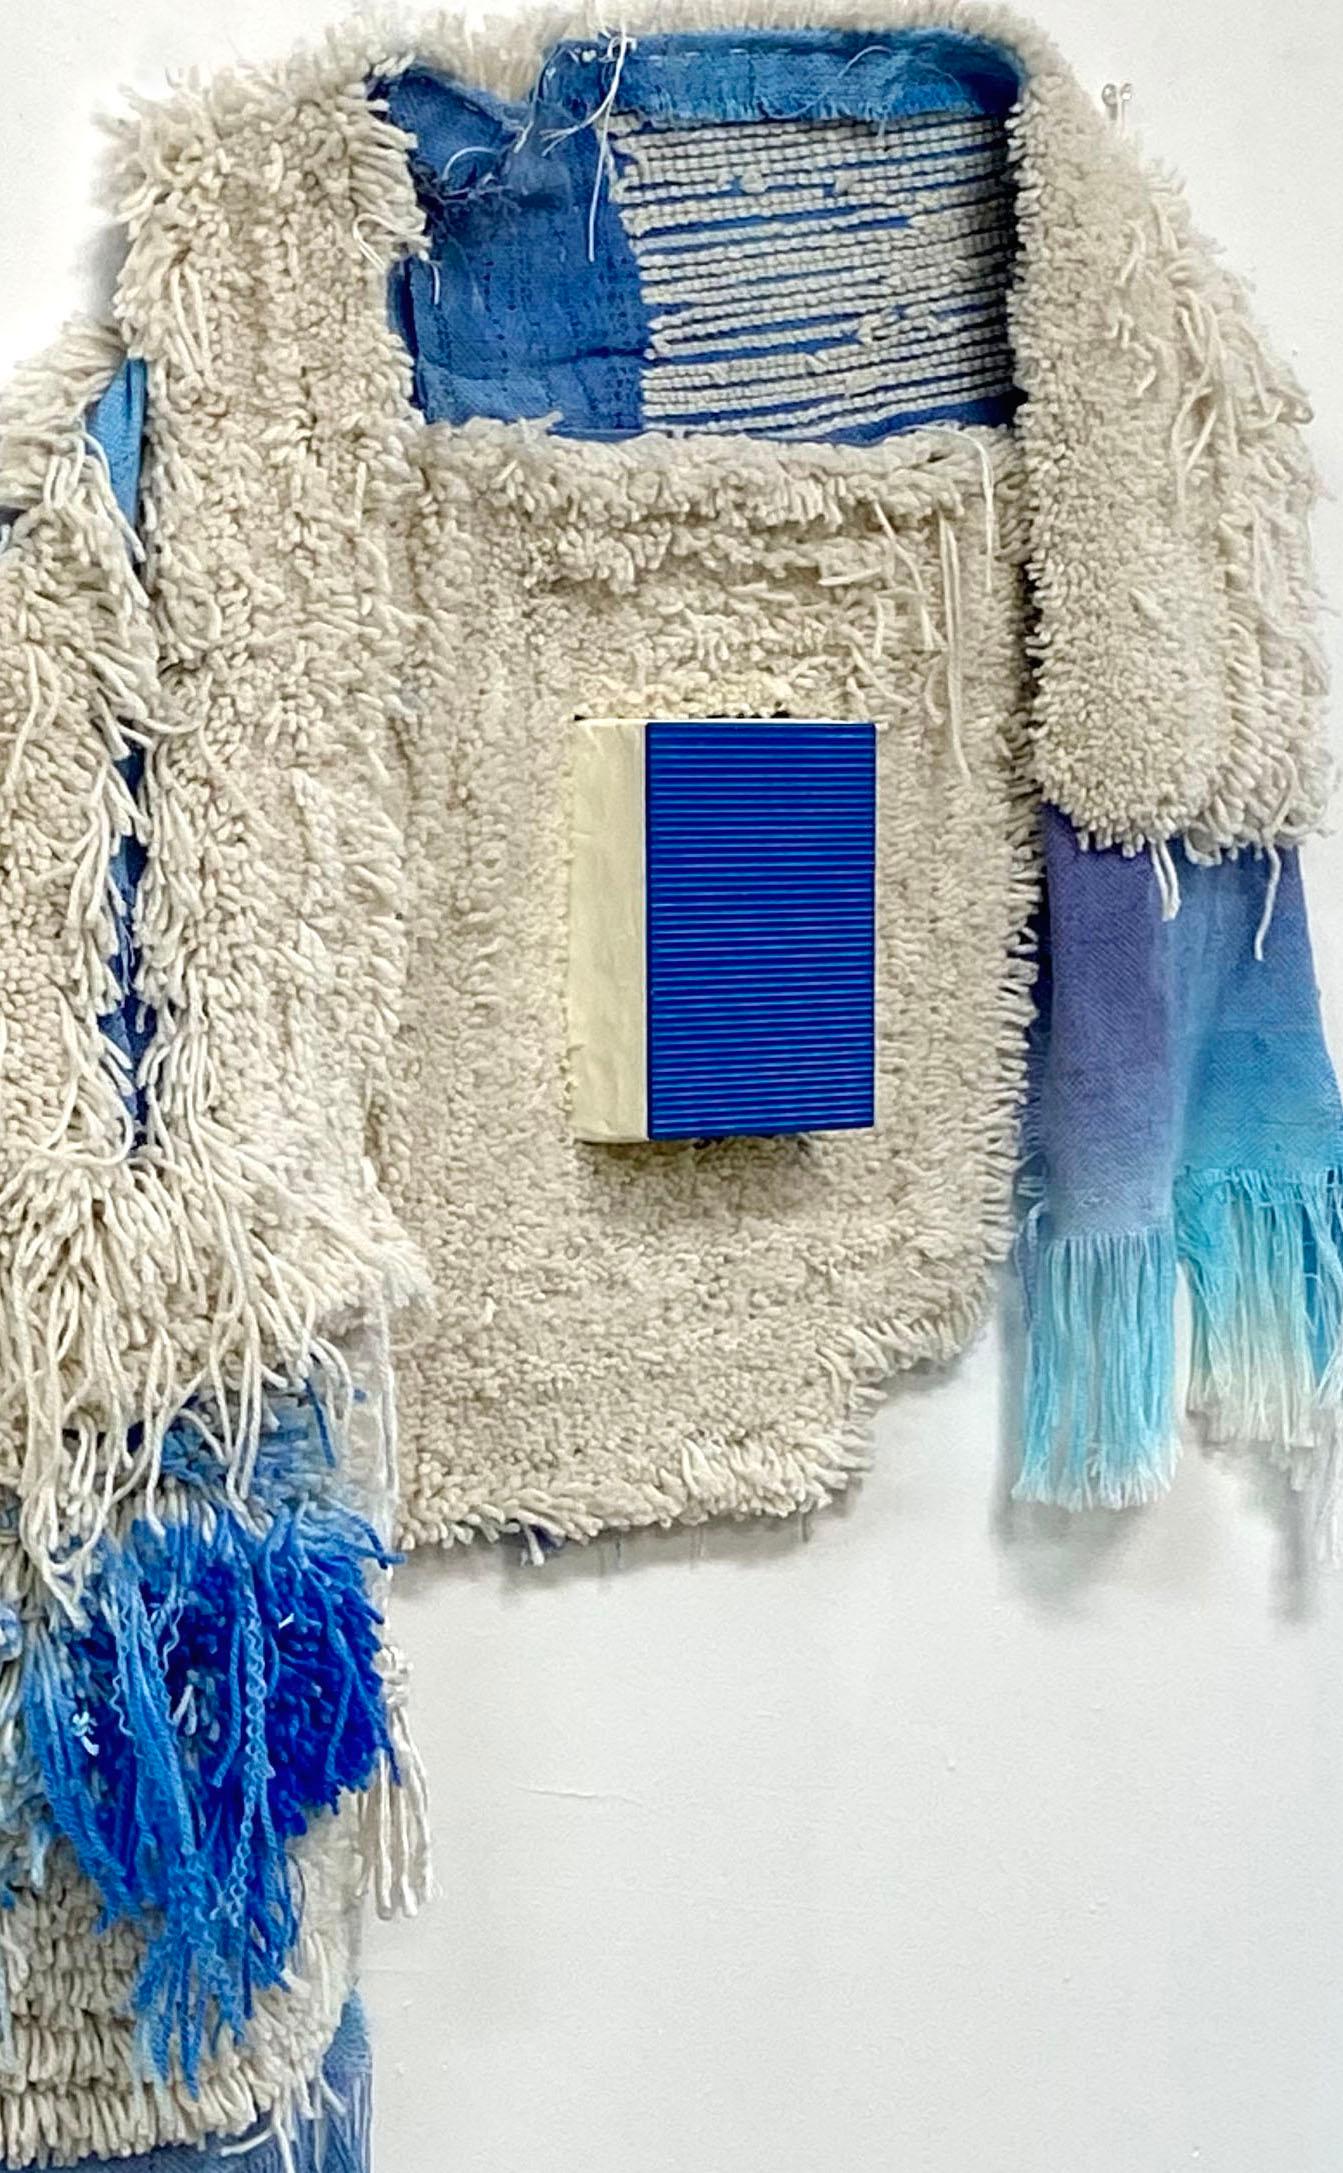 This piece is from a new body of work called 'Vital Signs’ which will premiere at Ivy Brown Gallery in NYC and springs from the domain of hospitals and illness through combinations of hand-woven and tufted textiles and minimalist box-like objects